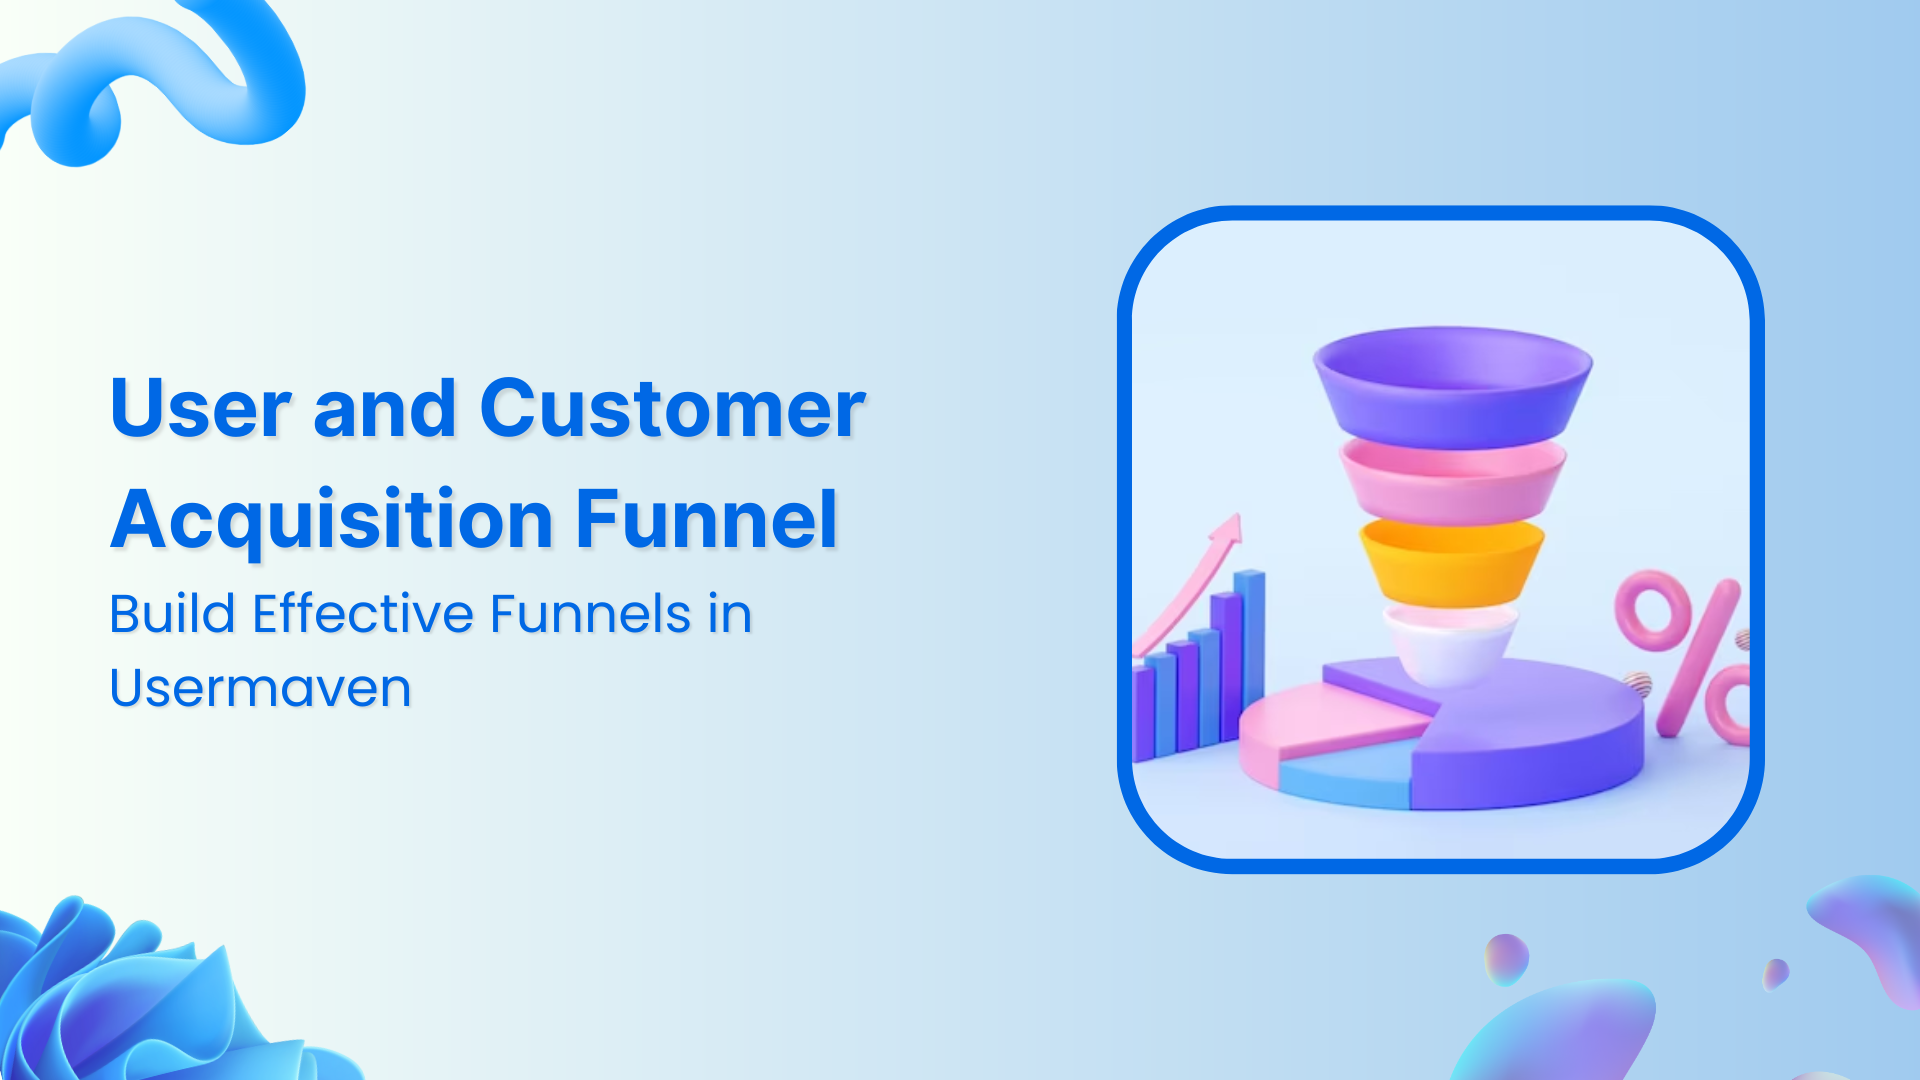 A Guide to User & Customer Acquisition Funnel with Usermaven